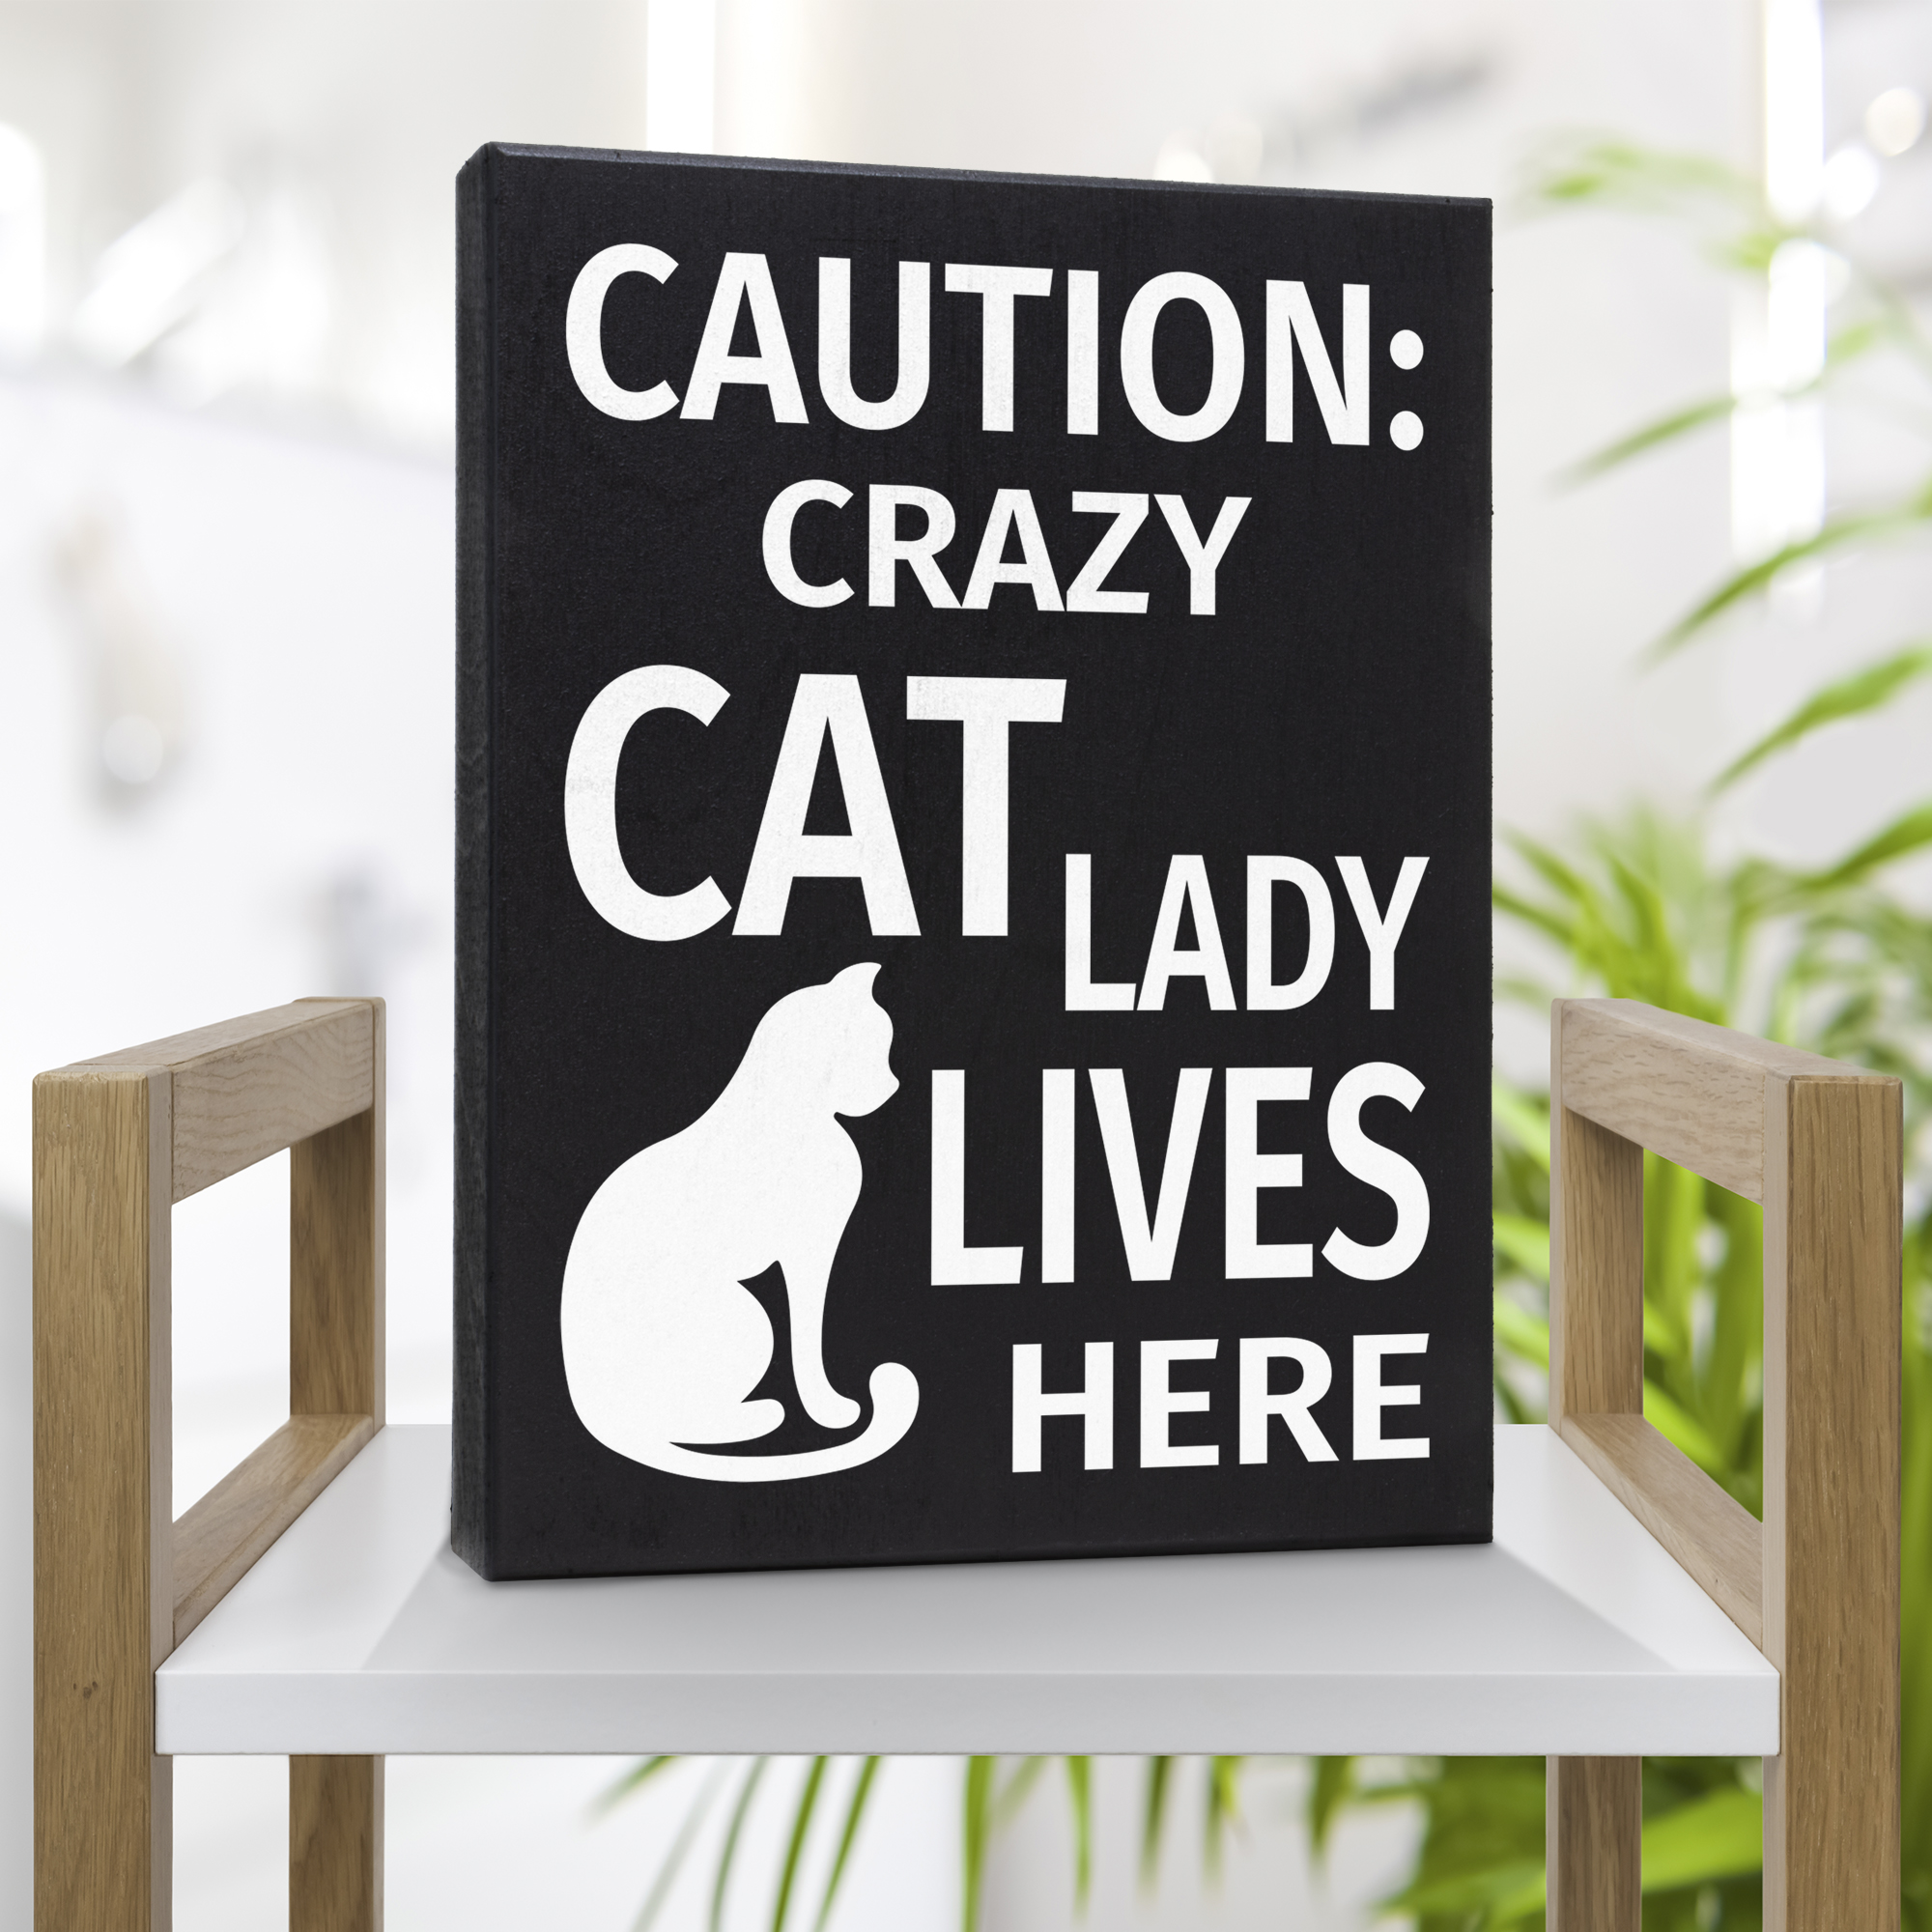 Cat - I'm the crazy cat lady Welcome to the crazy cat house Funny